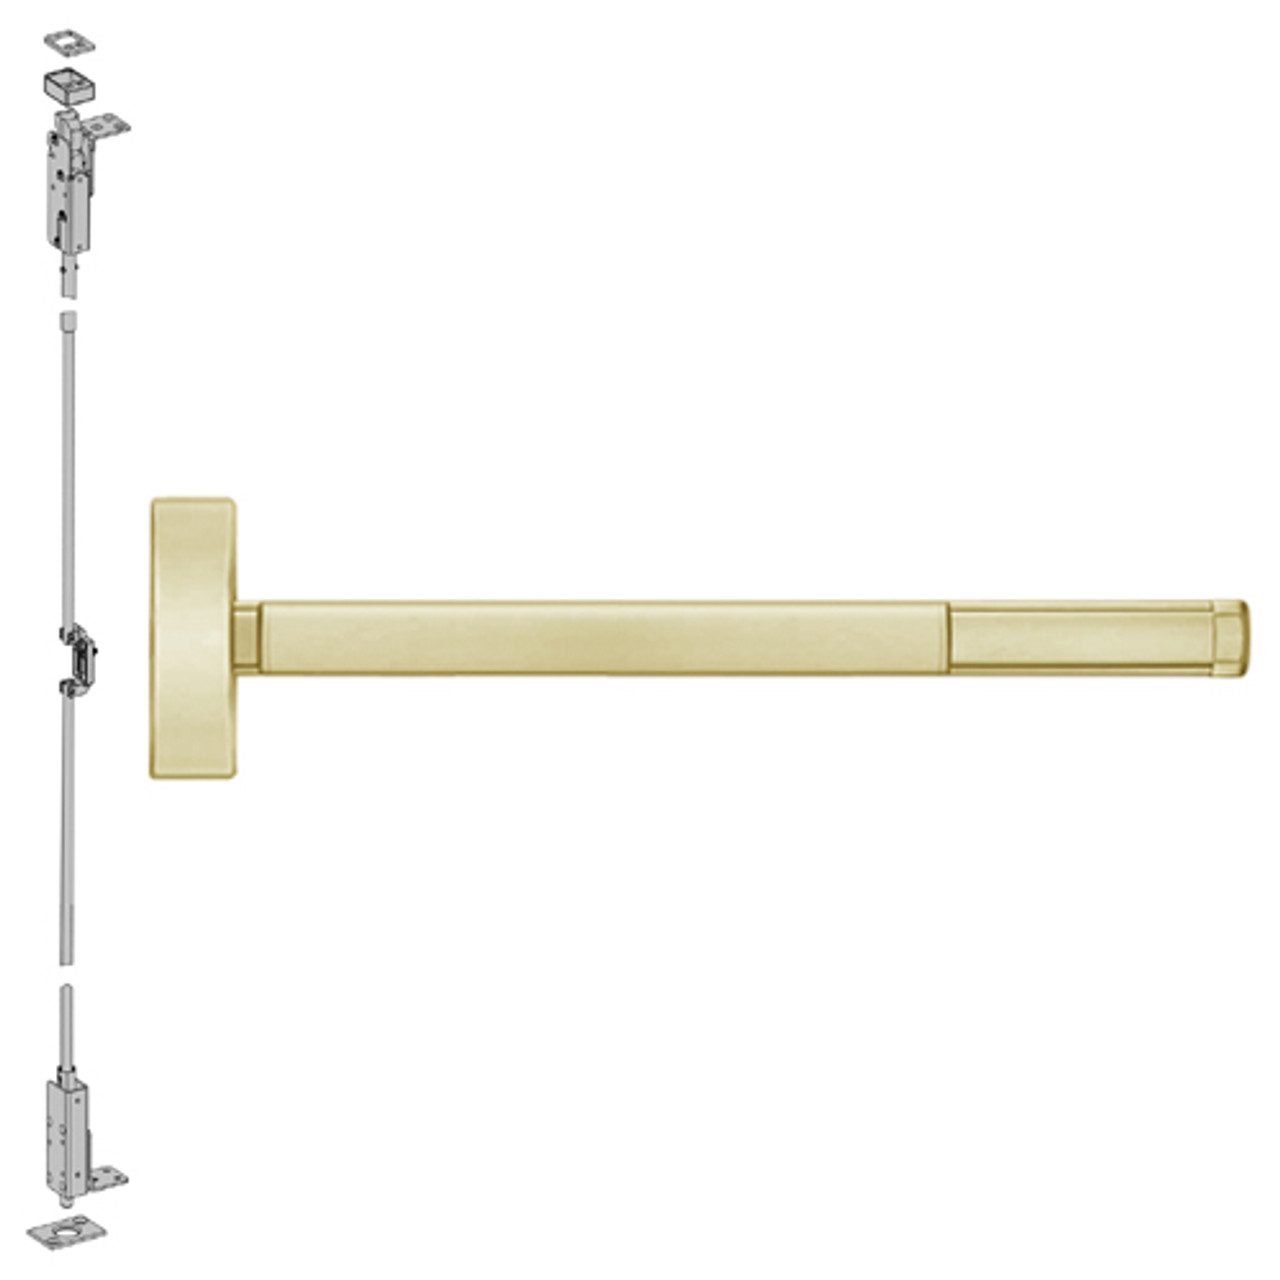 ELR2702-606-36 PHI 2700 Series Wood Door Concealed Vertical Exit Device with Electric Latch Retraction Prepped for Dummy Trim in Satin Brass Finish